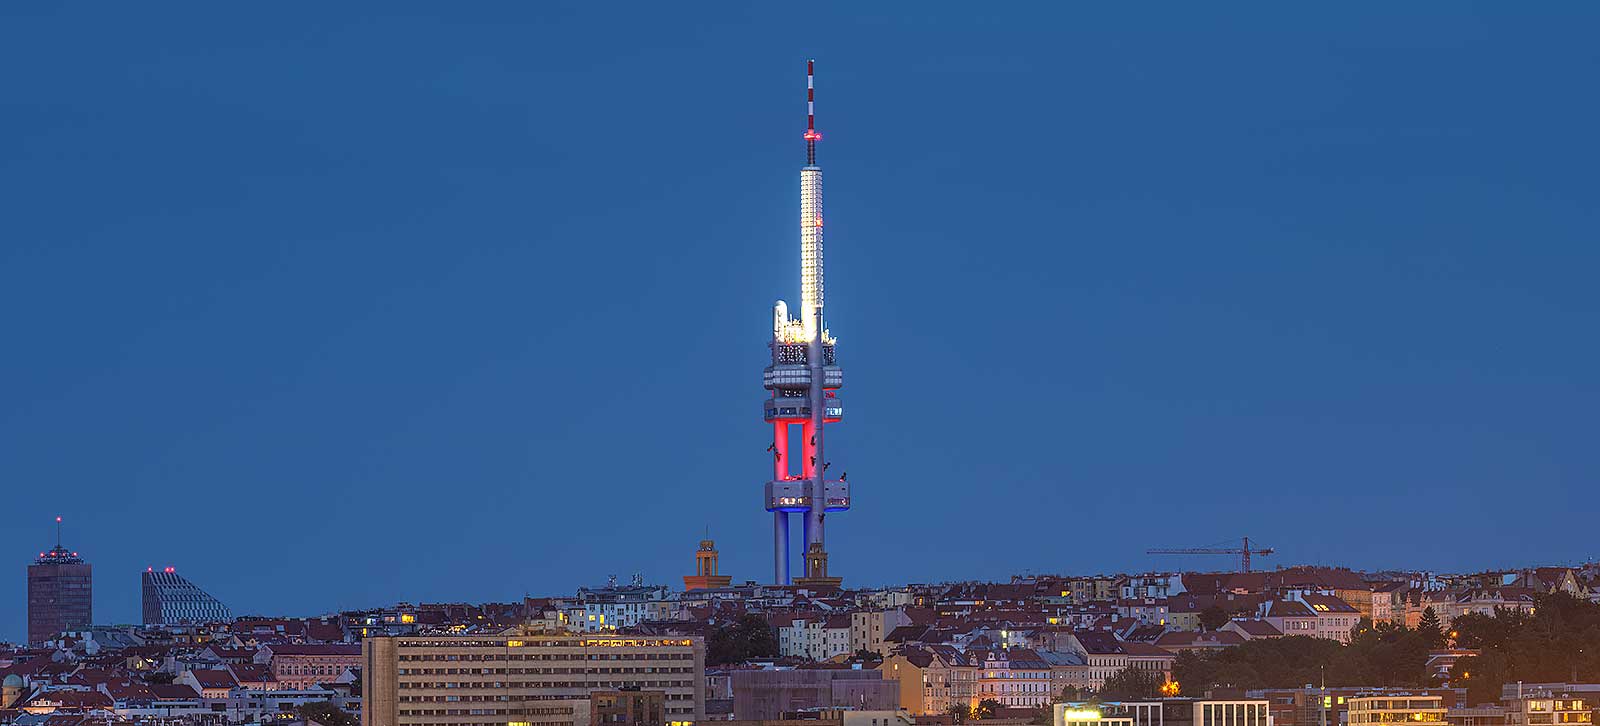 MUSICONLY dab+ the-zizkov-tv-tower-and-the-city-of-prague